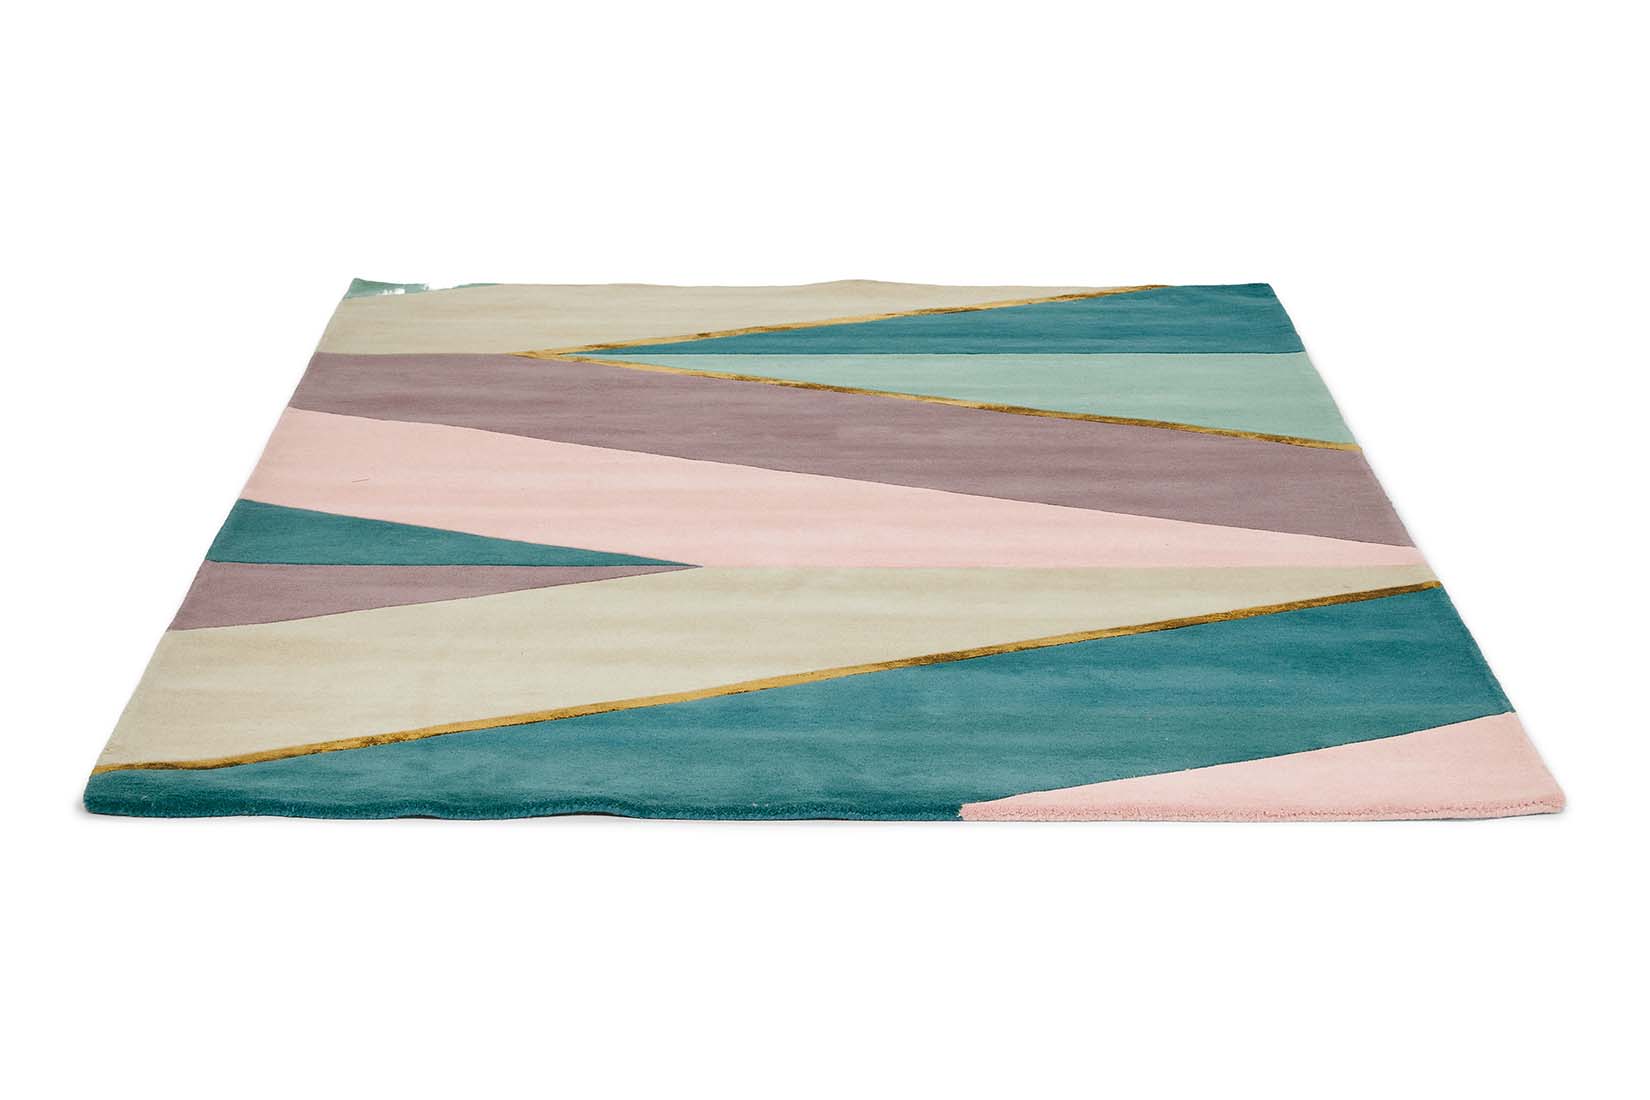 Modern rug with geometric stripe pattern in green, teal, grey and purple. Gold details.